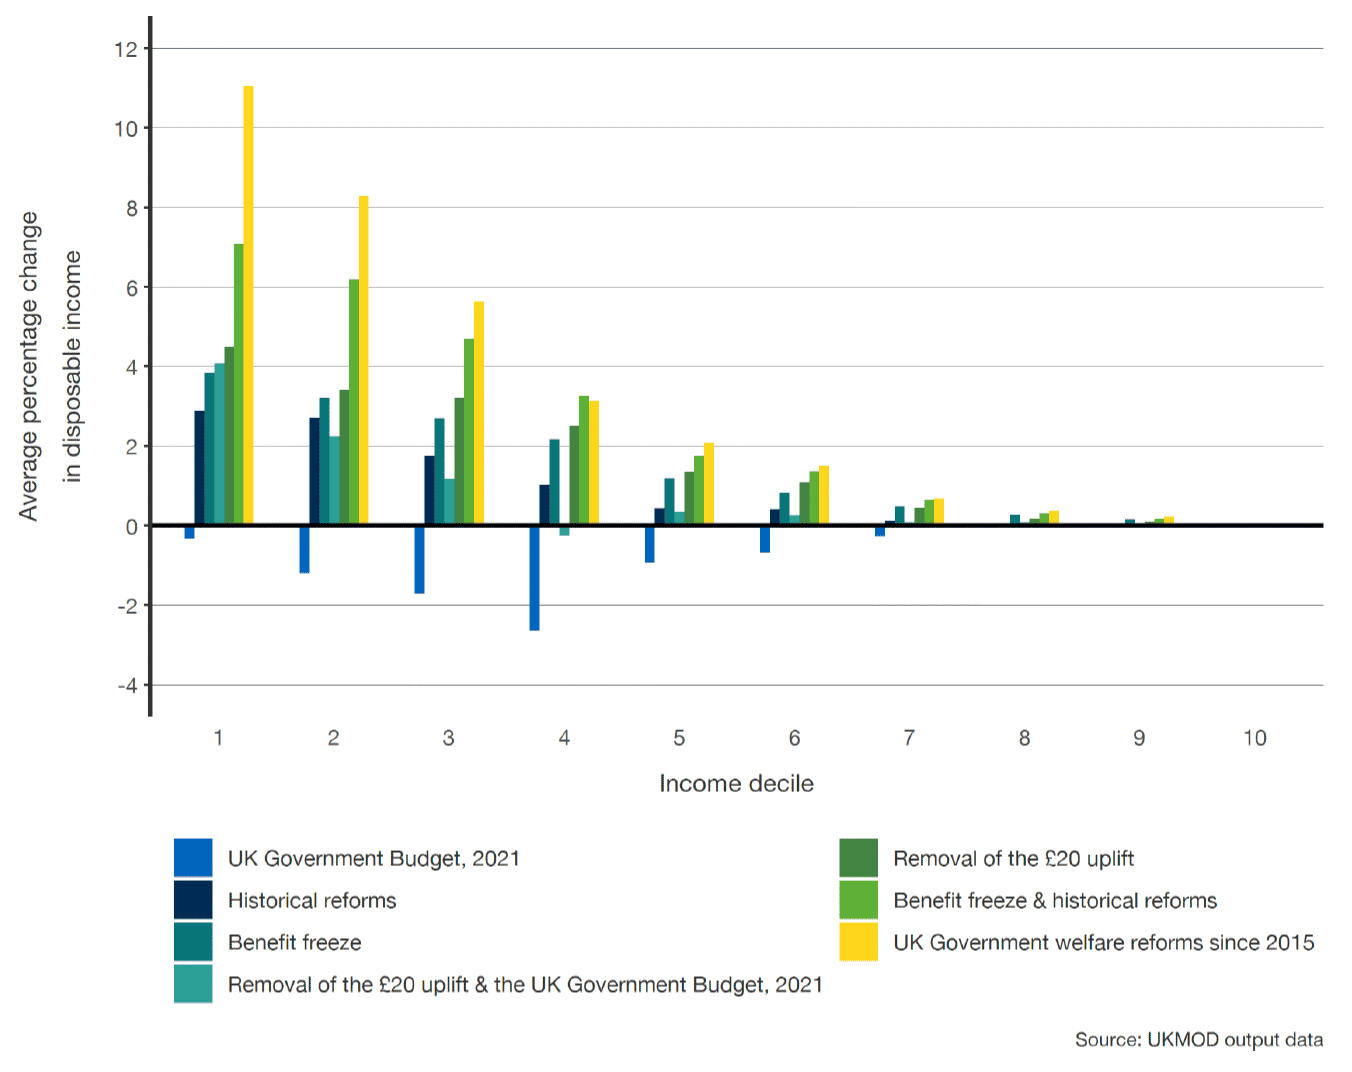 A bar chart showing income changes by decile, categorised by the seven distinct reform packages. 